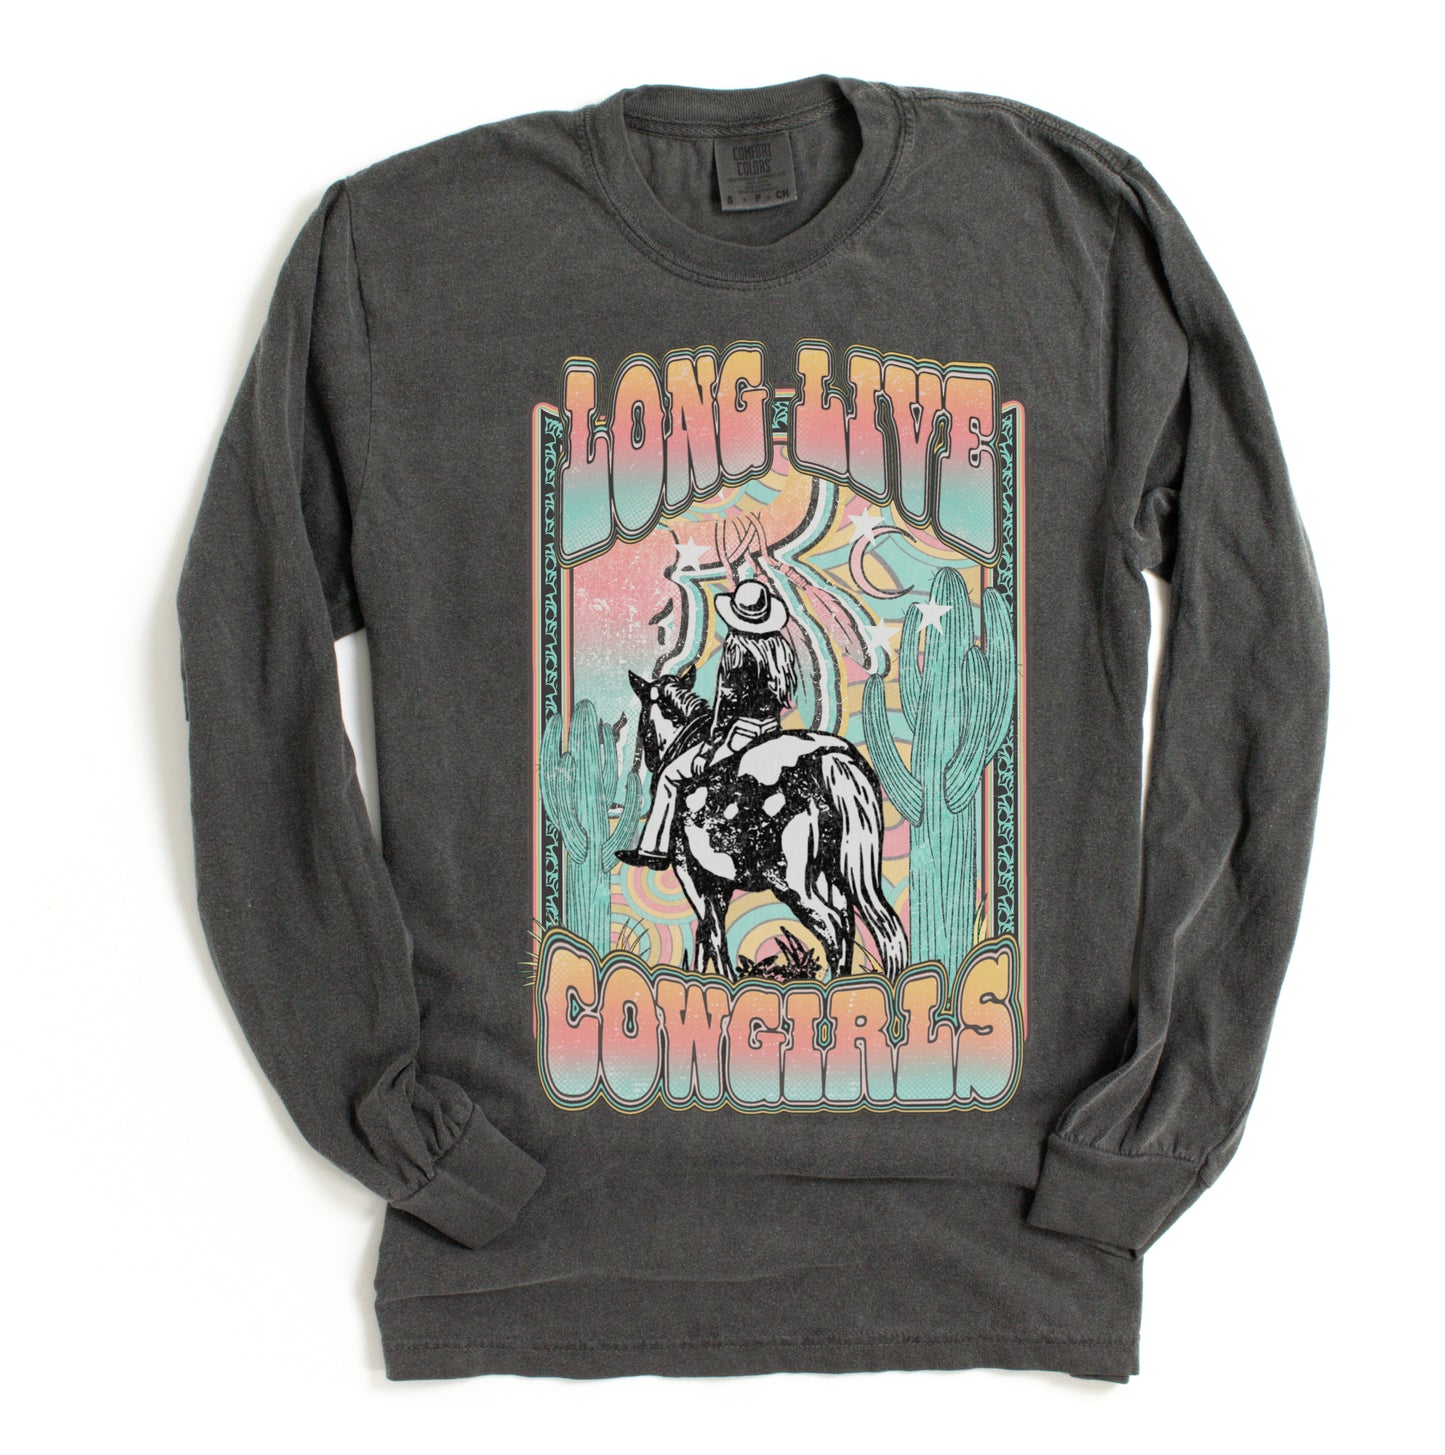 Long Sleeve Comfort Colors Long Live Cowgirls Western Style Shirt/ Unisex Sized Adult Sizes